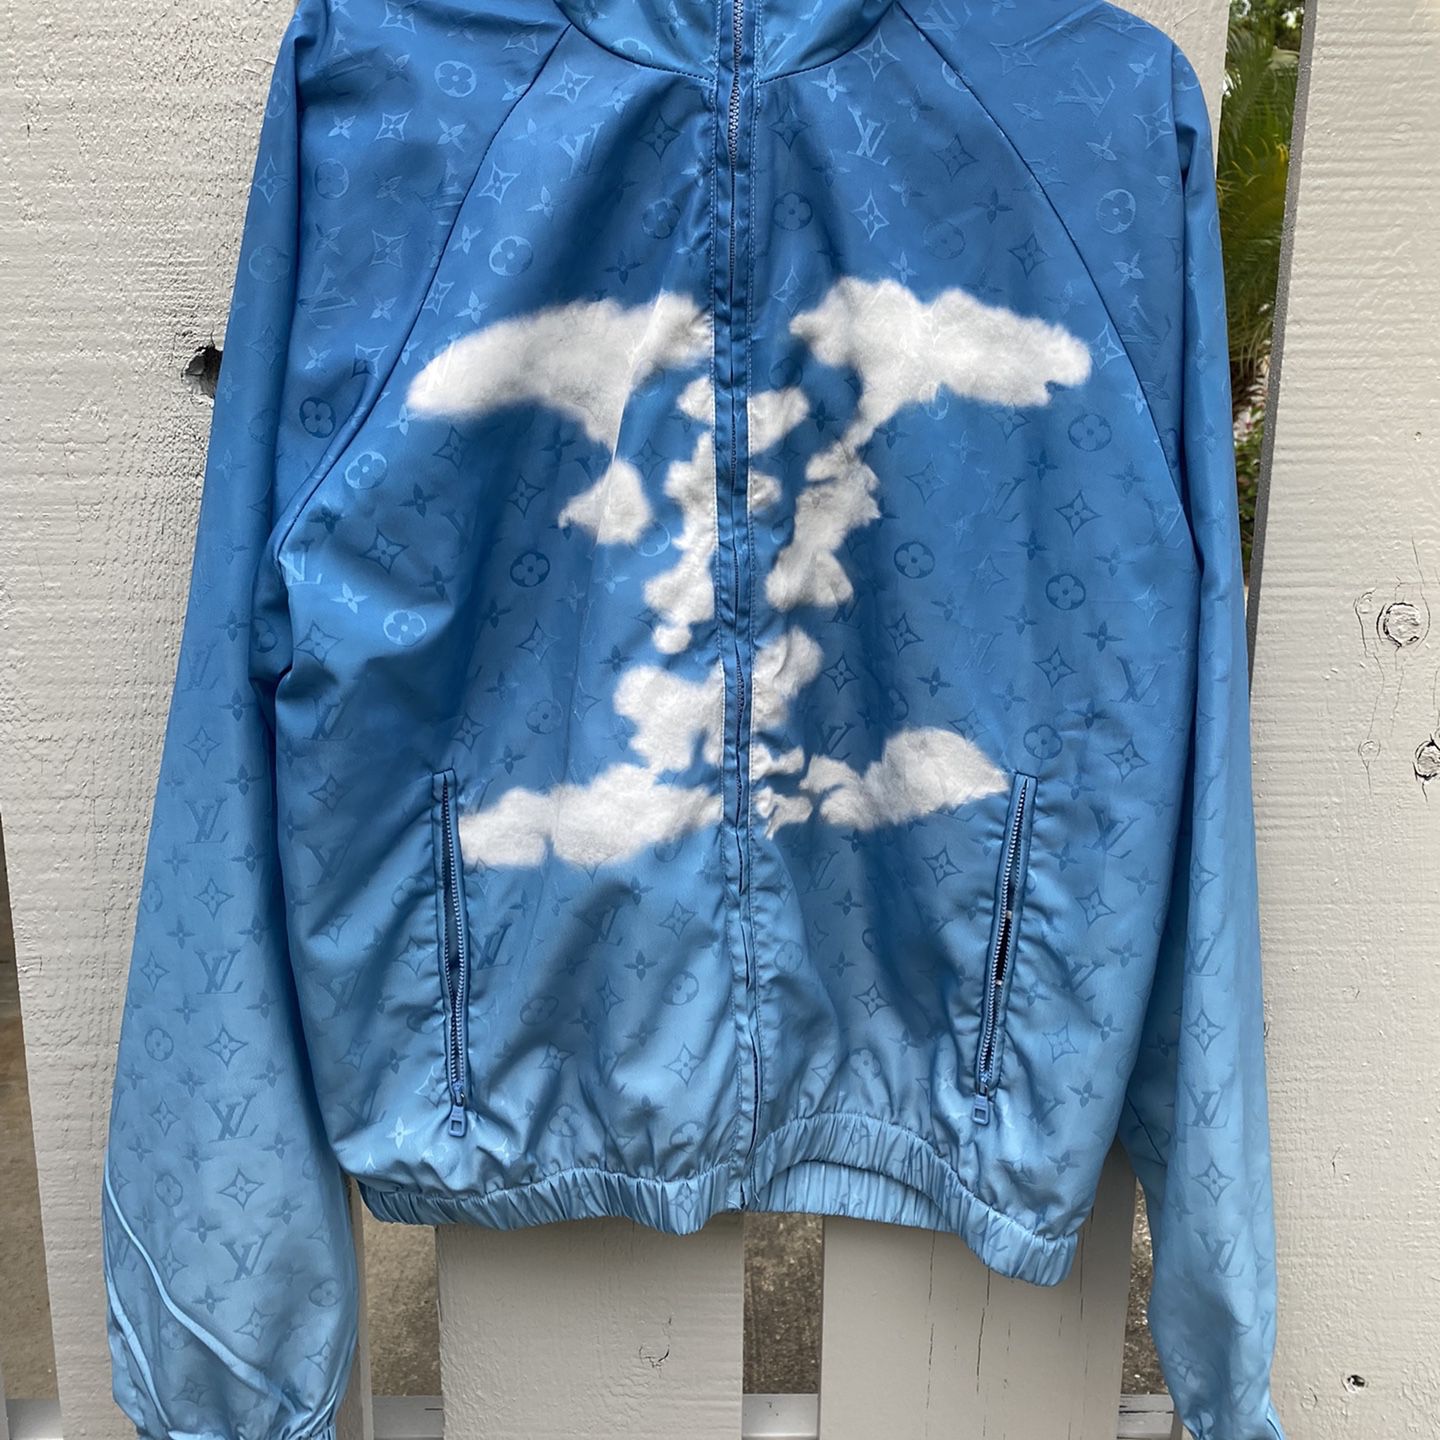 LOUIS VUITTON SS 2020 Mens VIRGIL ABLOH Monogram Logo Layered Mesh Jacket  Size M/L for Sale in Hollywood, FL - OfferUp